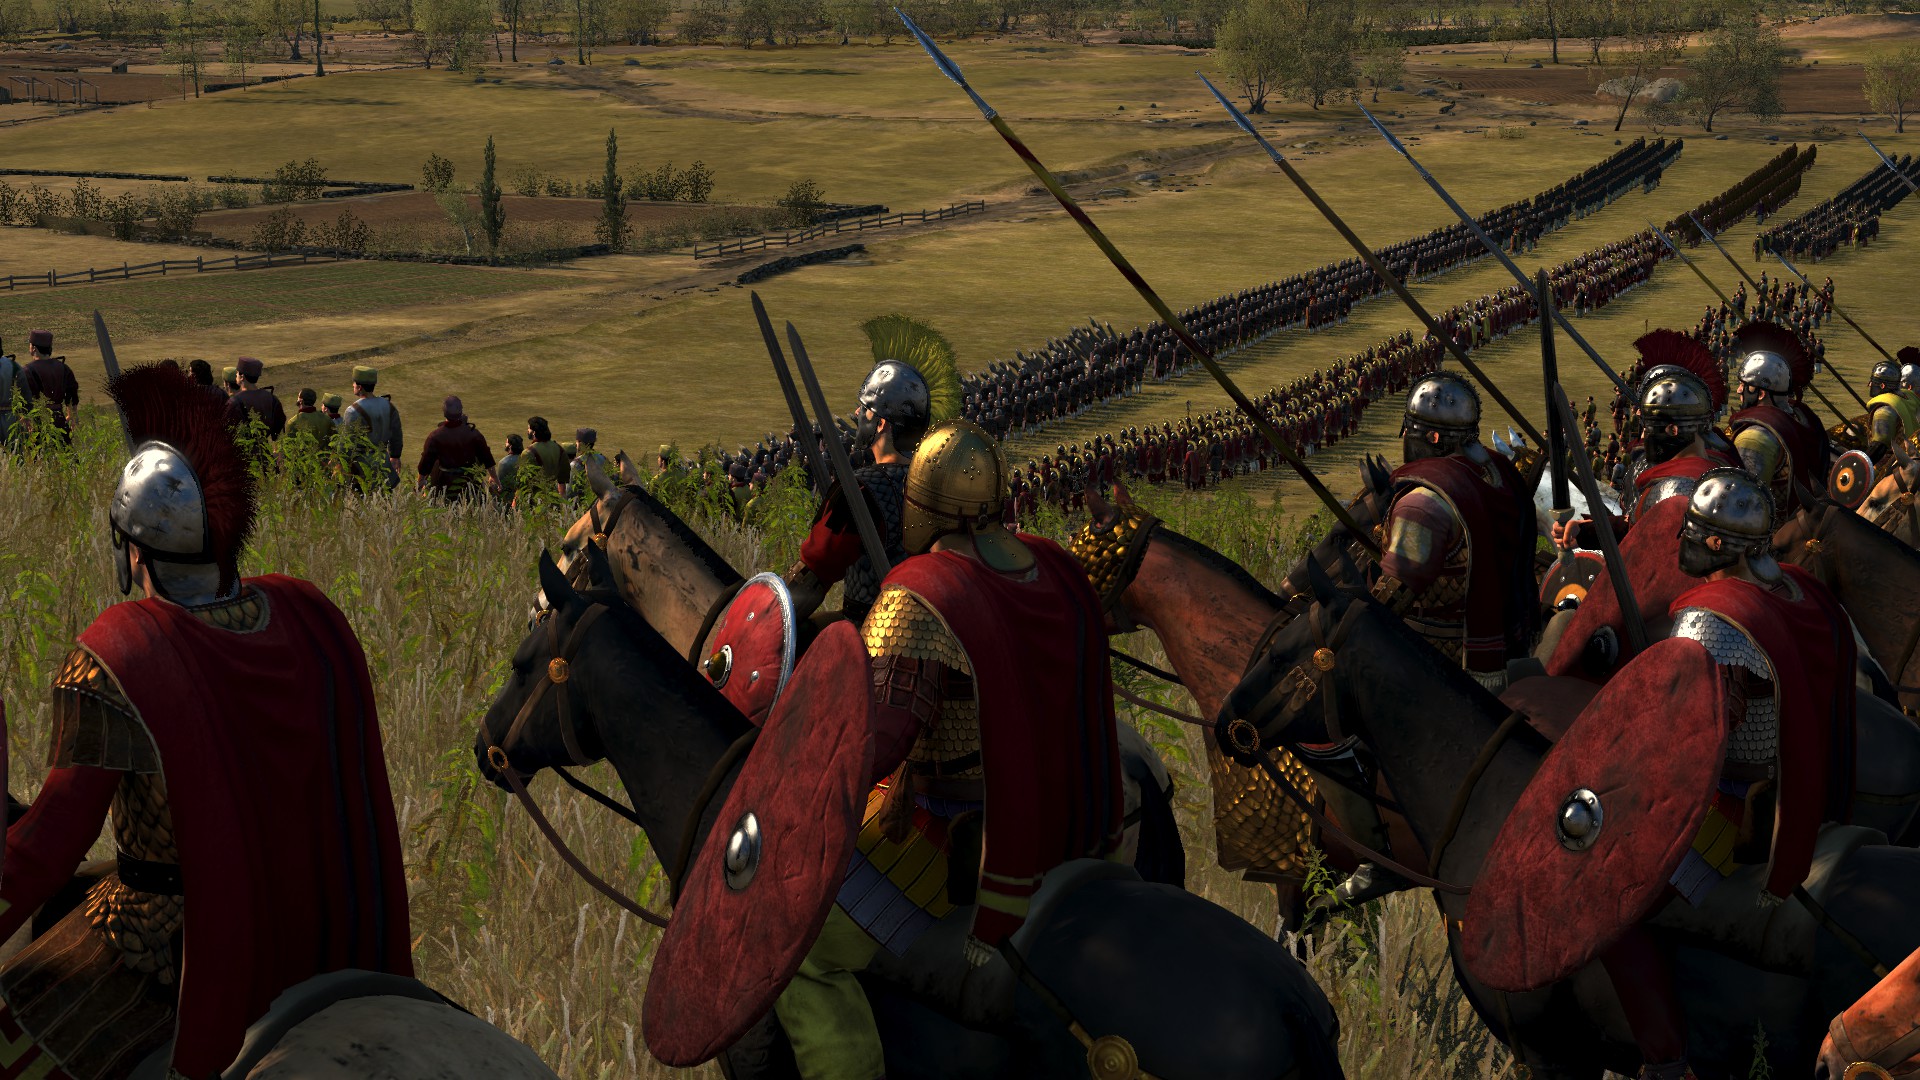 agrez all in one mod for total war attila, image 2, image, screenshots, scr...